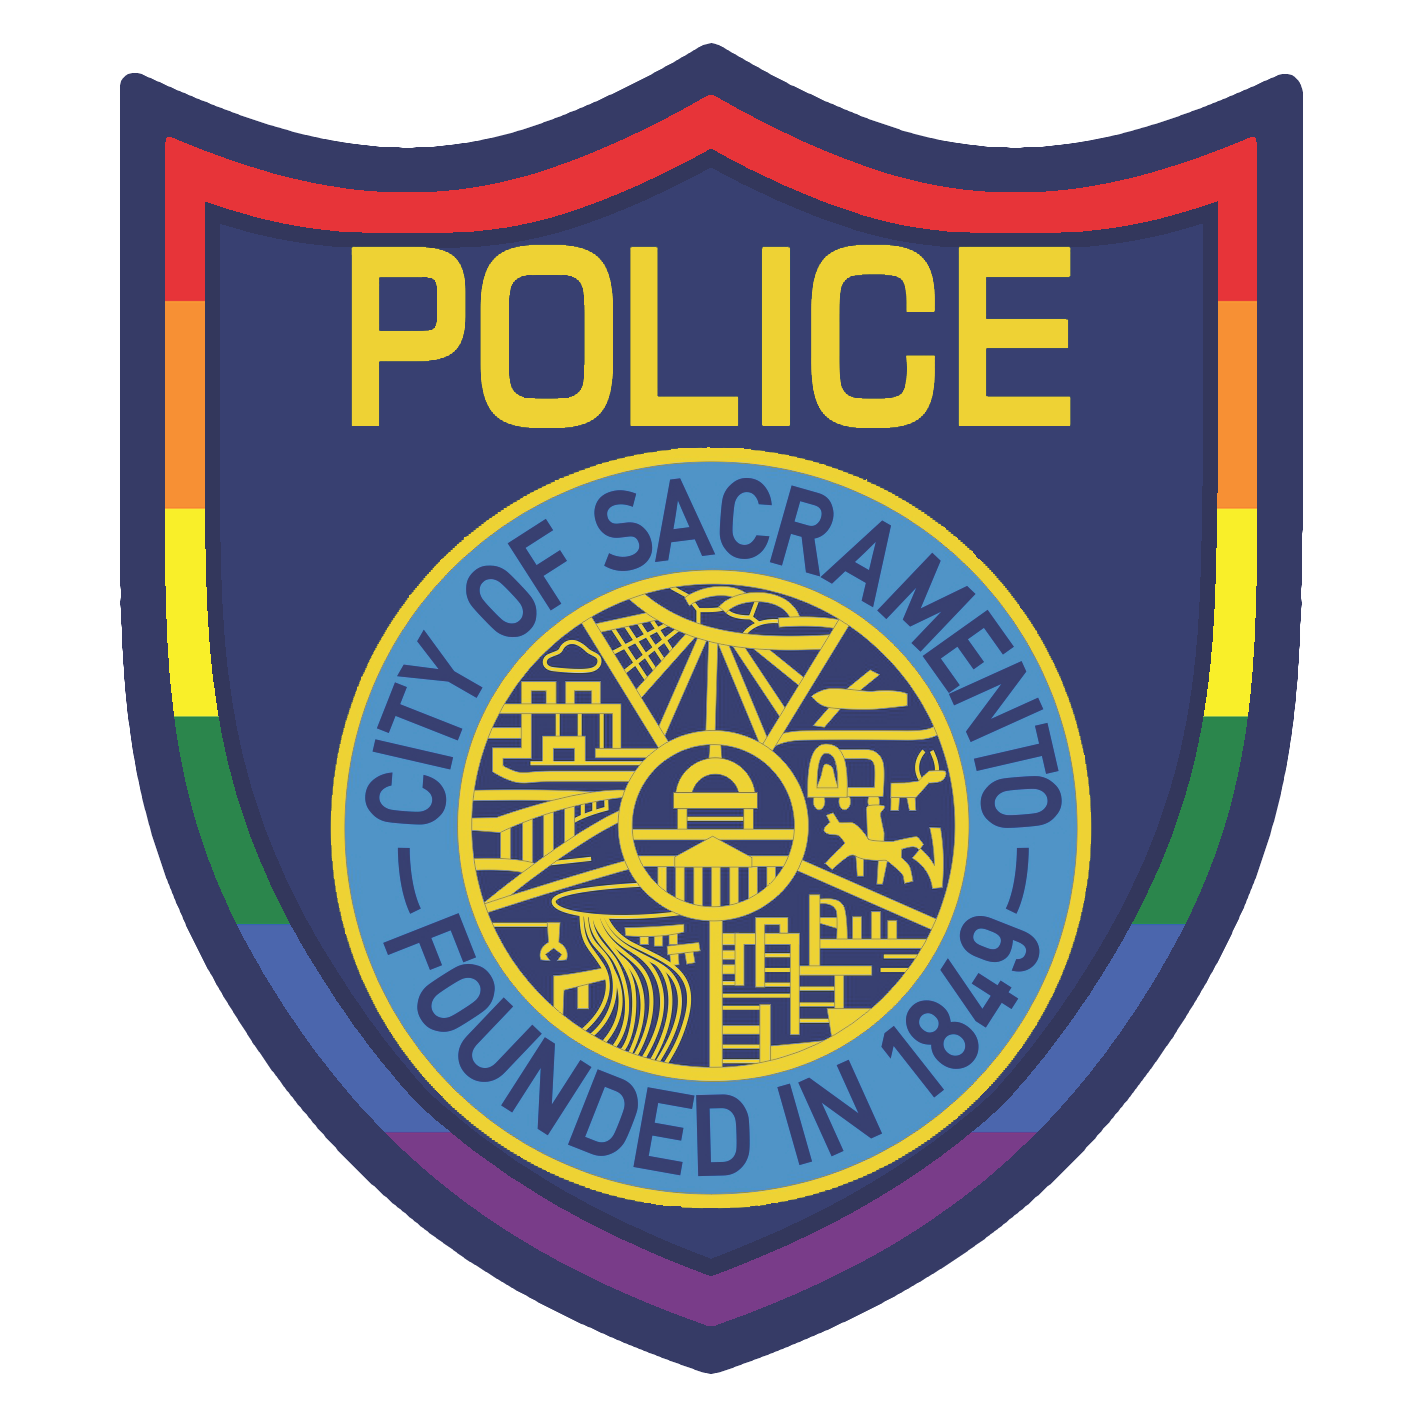 The Sacramento Police Department's official Pride Patch. It is similar to the standard police patch which is blue with the city seal in the center and the word "Police" in yellow above, but this patch also has a rainbow border